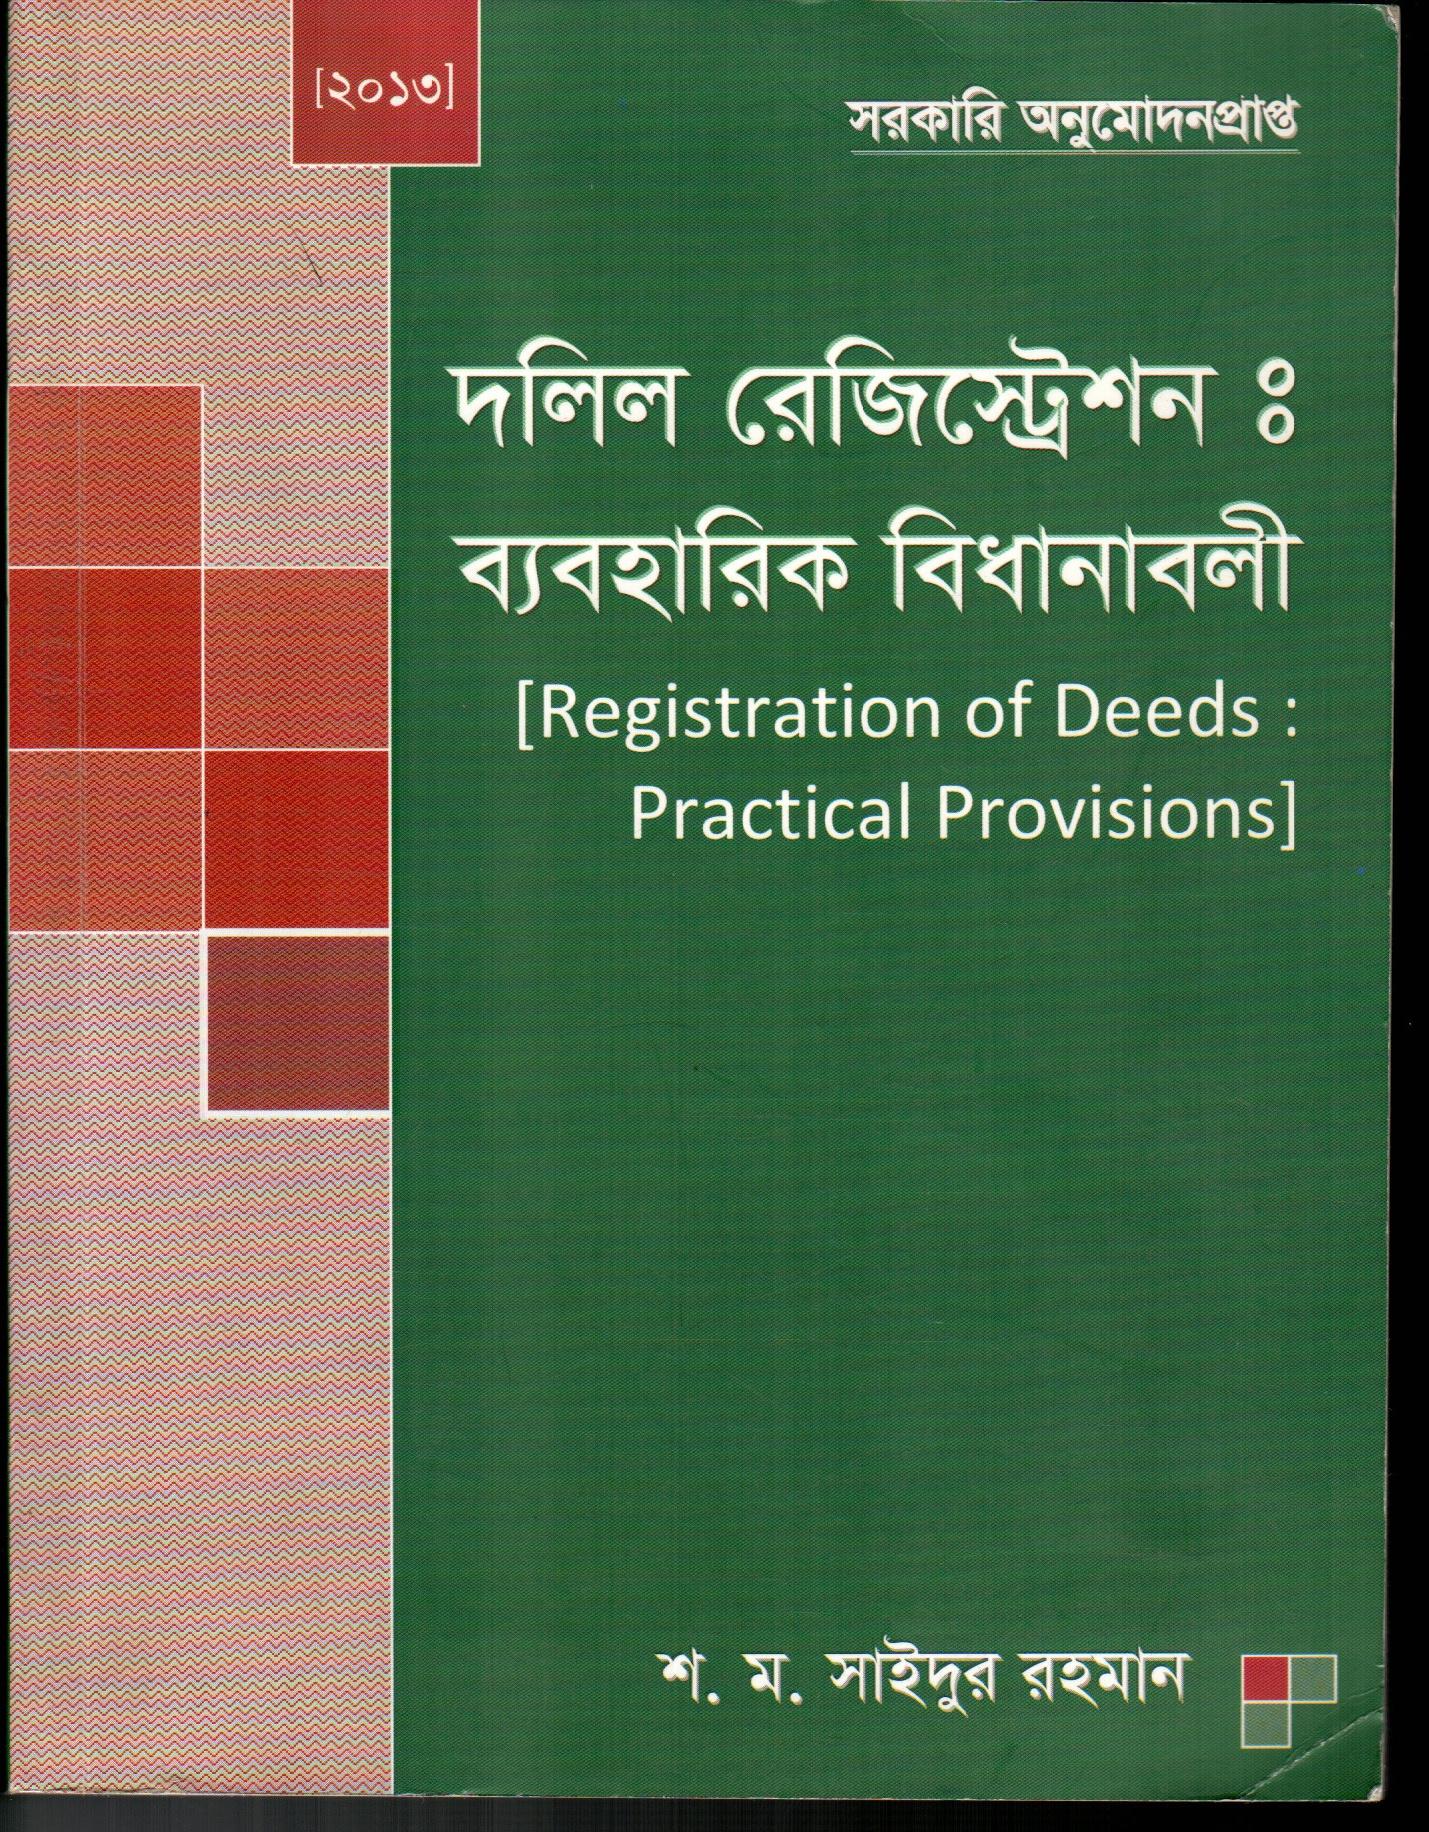 Registration of Deeds,Practical Provisions